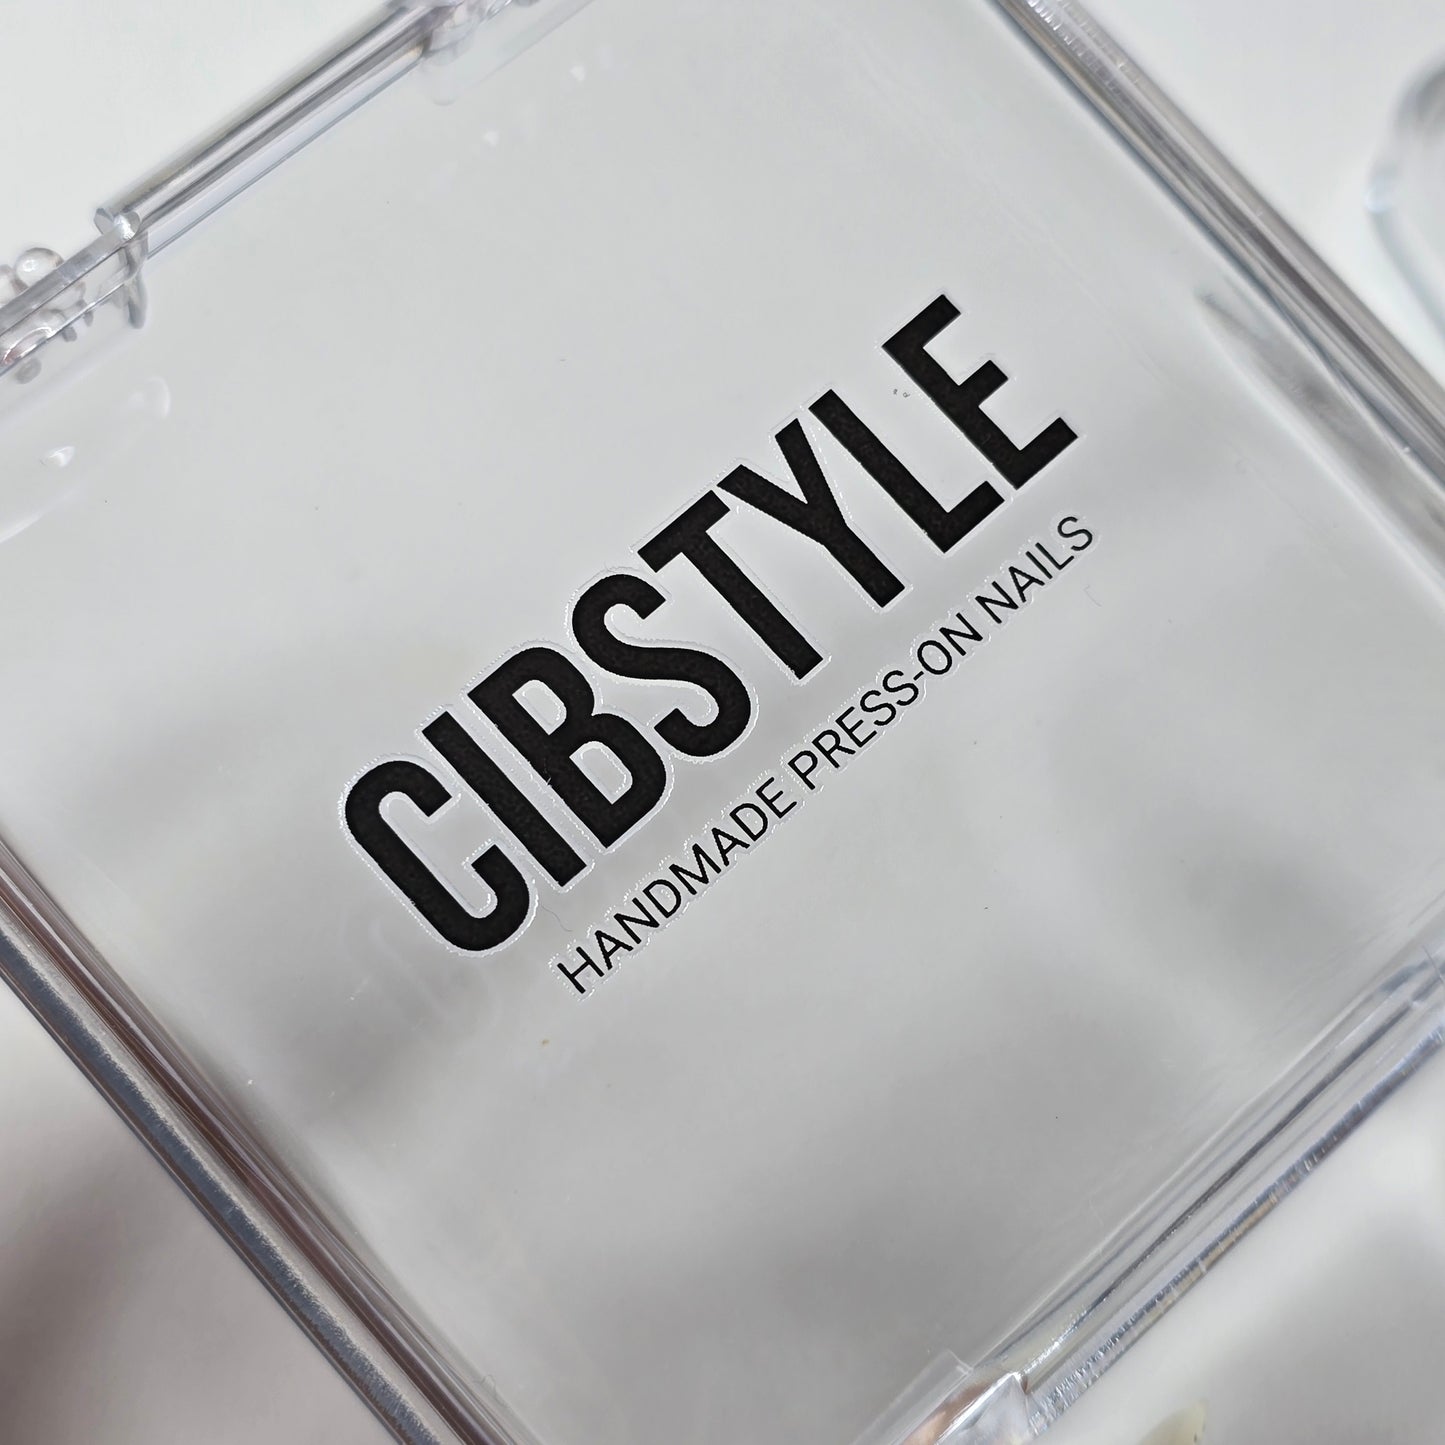 CIBSTYLE Clear Press On Nails Storage Boxes With Customized Logo (UV Transfer Labels)